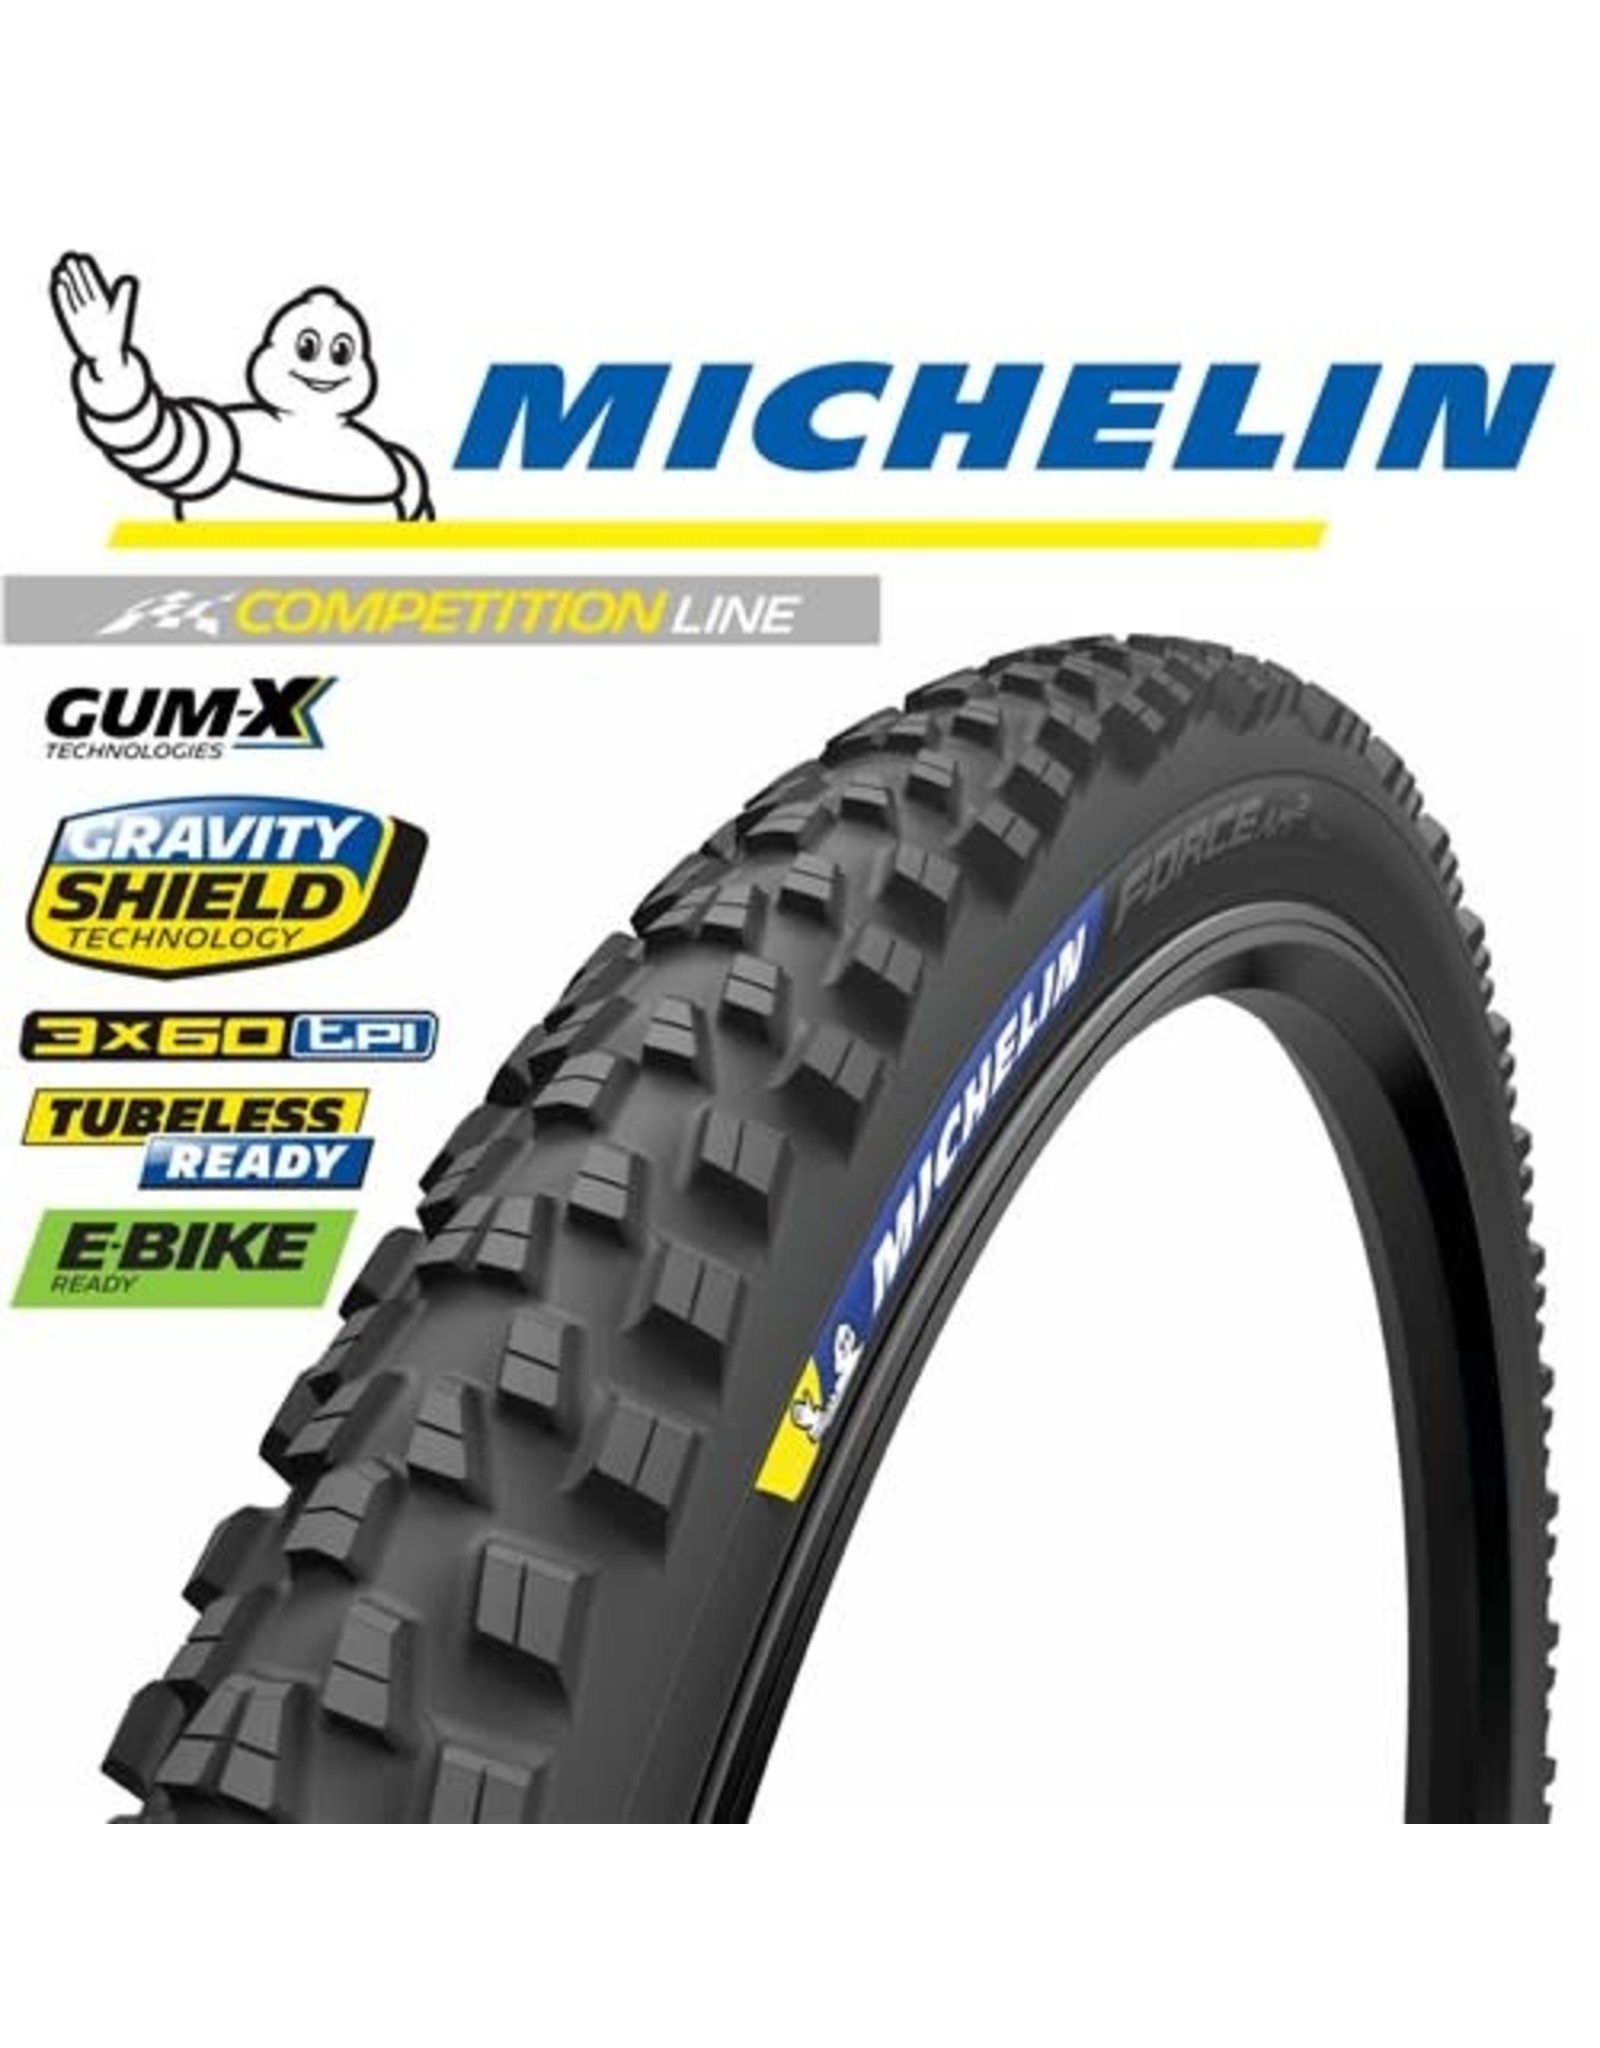 MICHELIN MICHELIN FORCE AM COMPETITION 27.5x2.60” TYRE